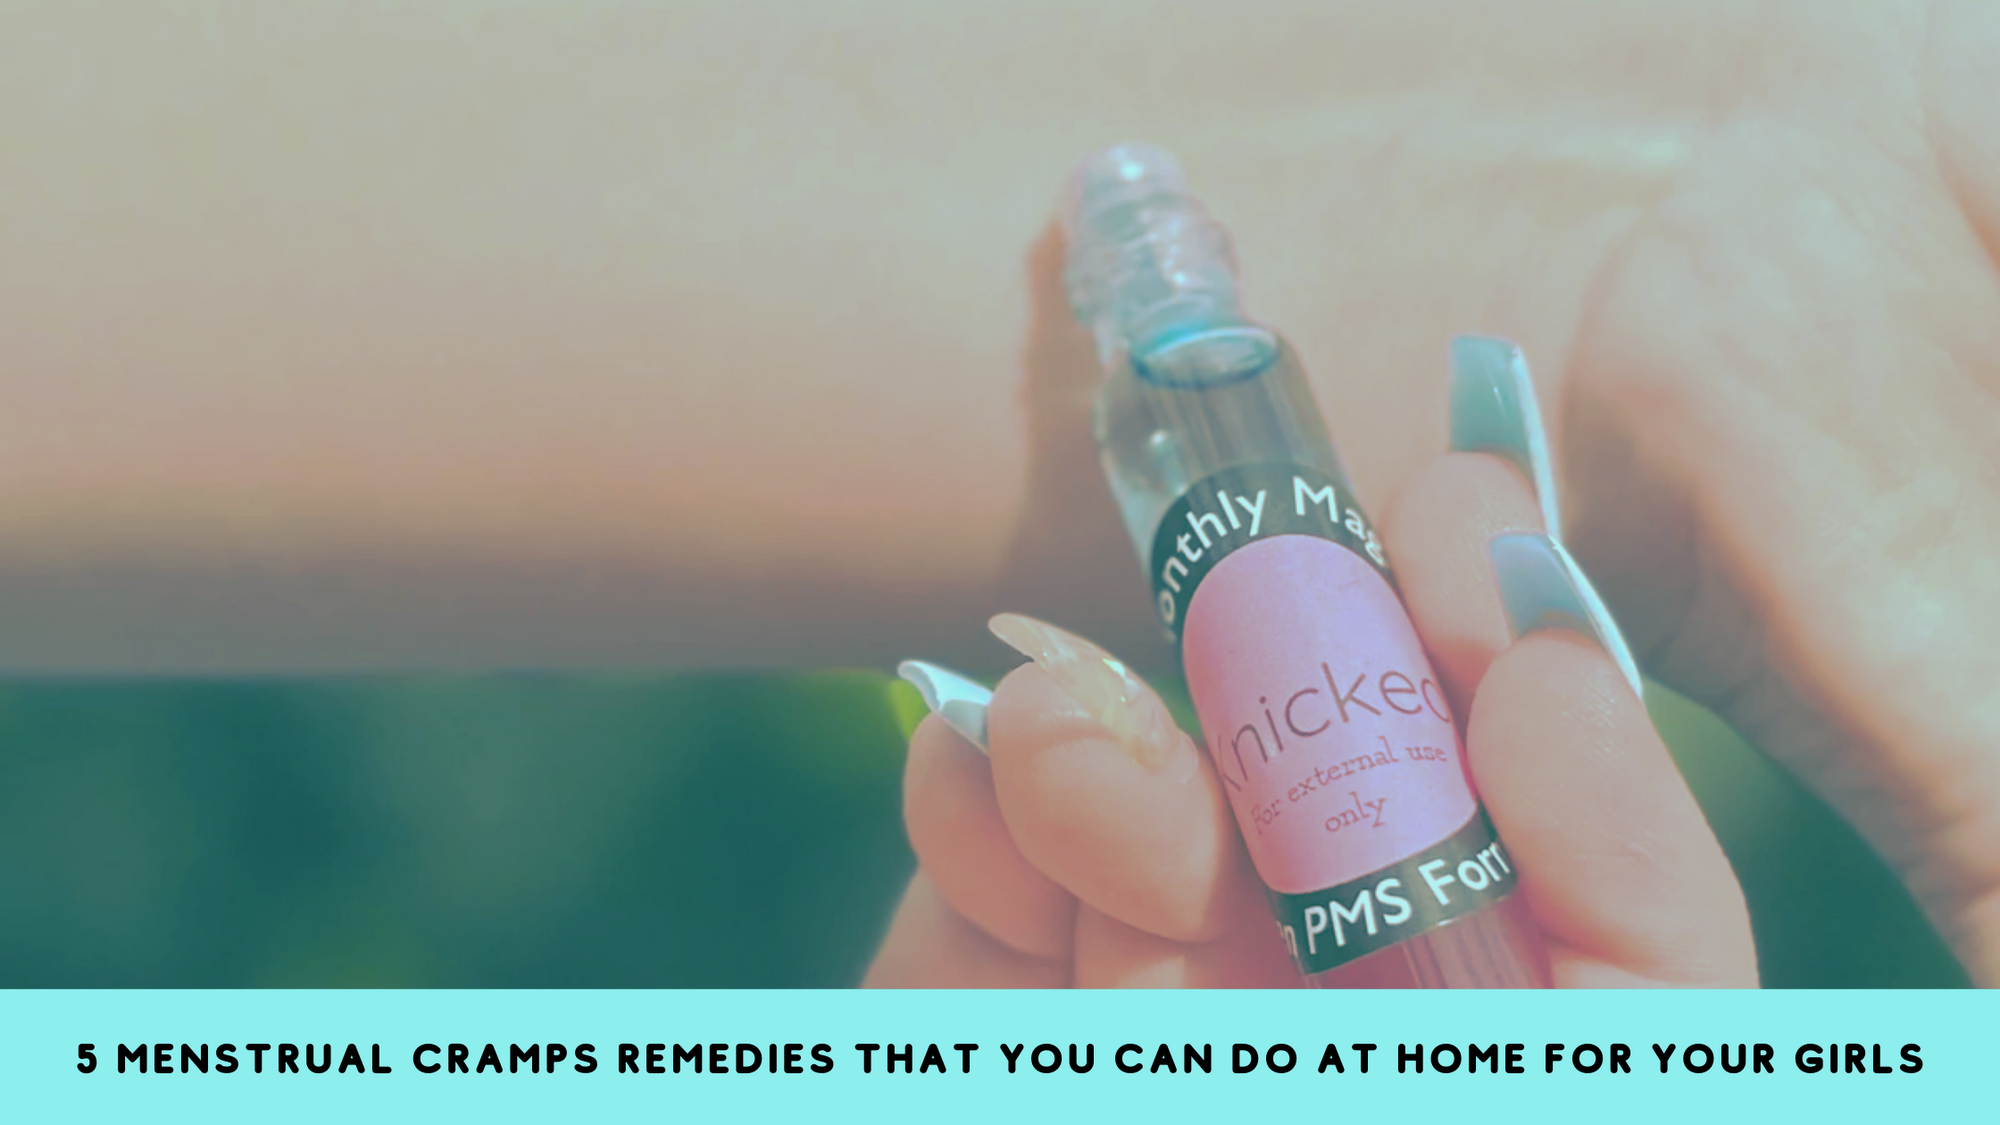 5 menstrual cramps remedies to do at home for your girls